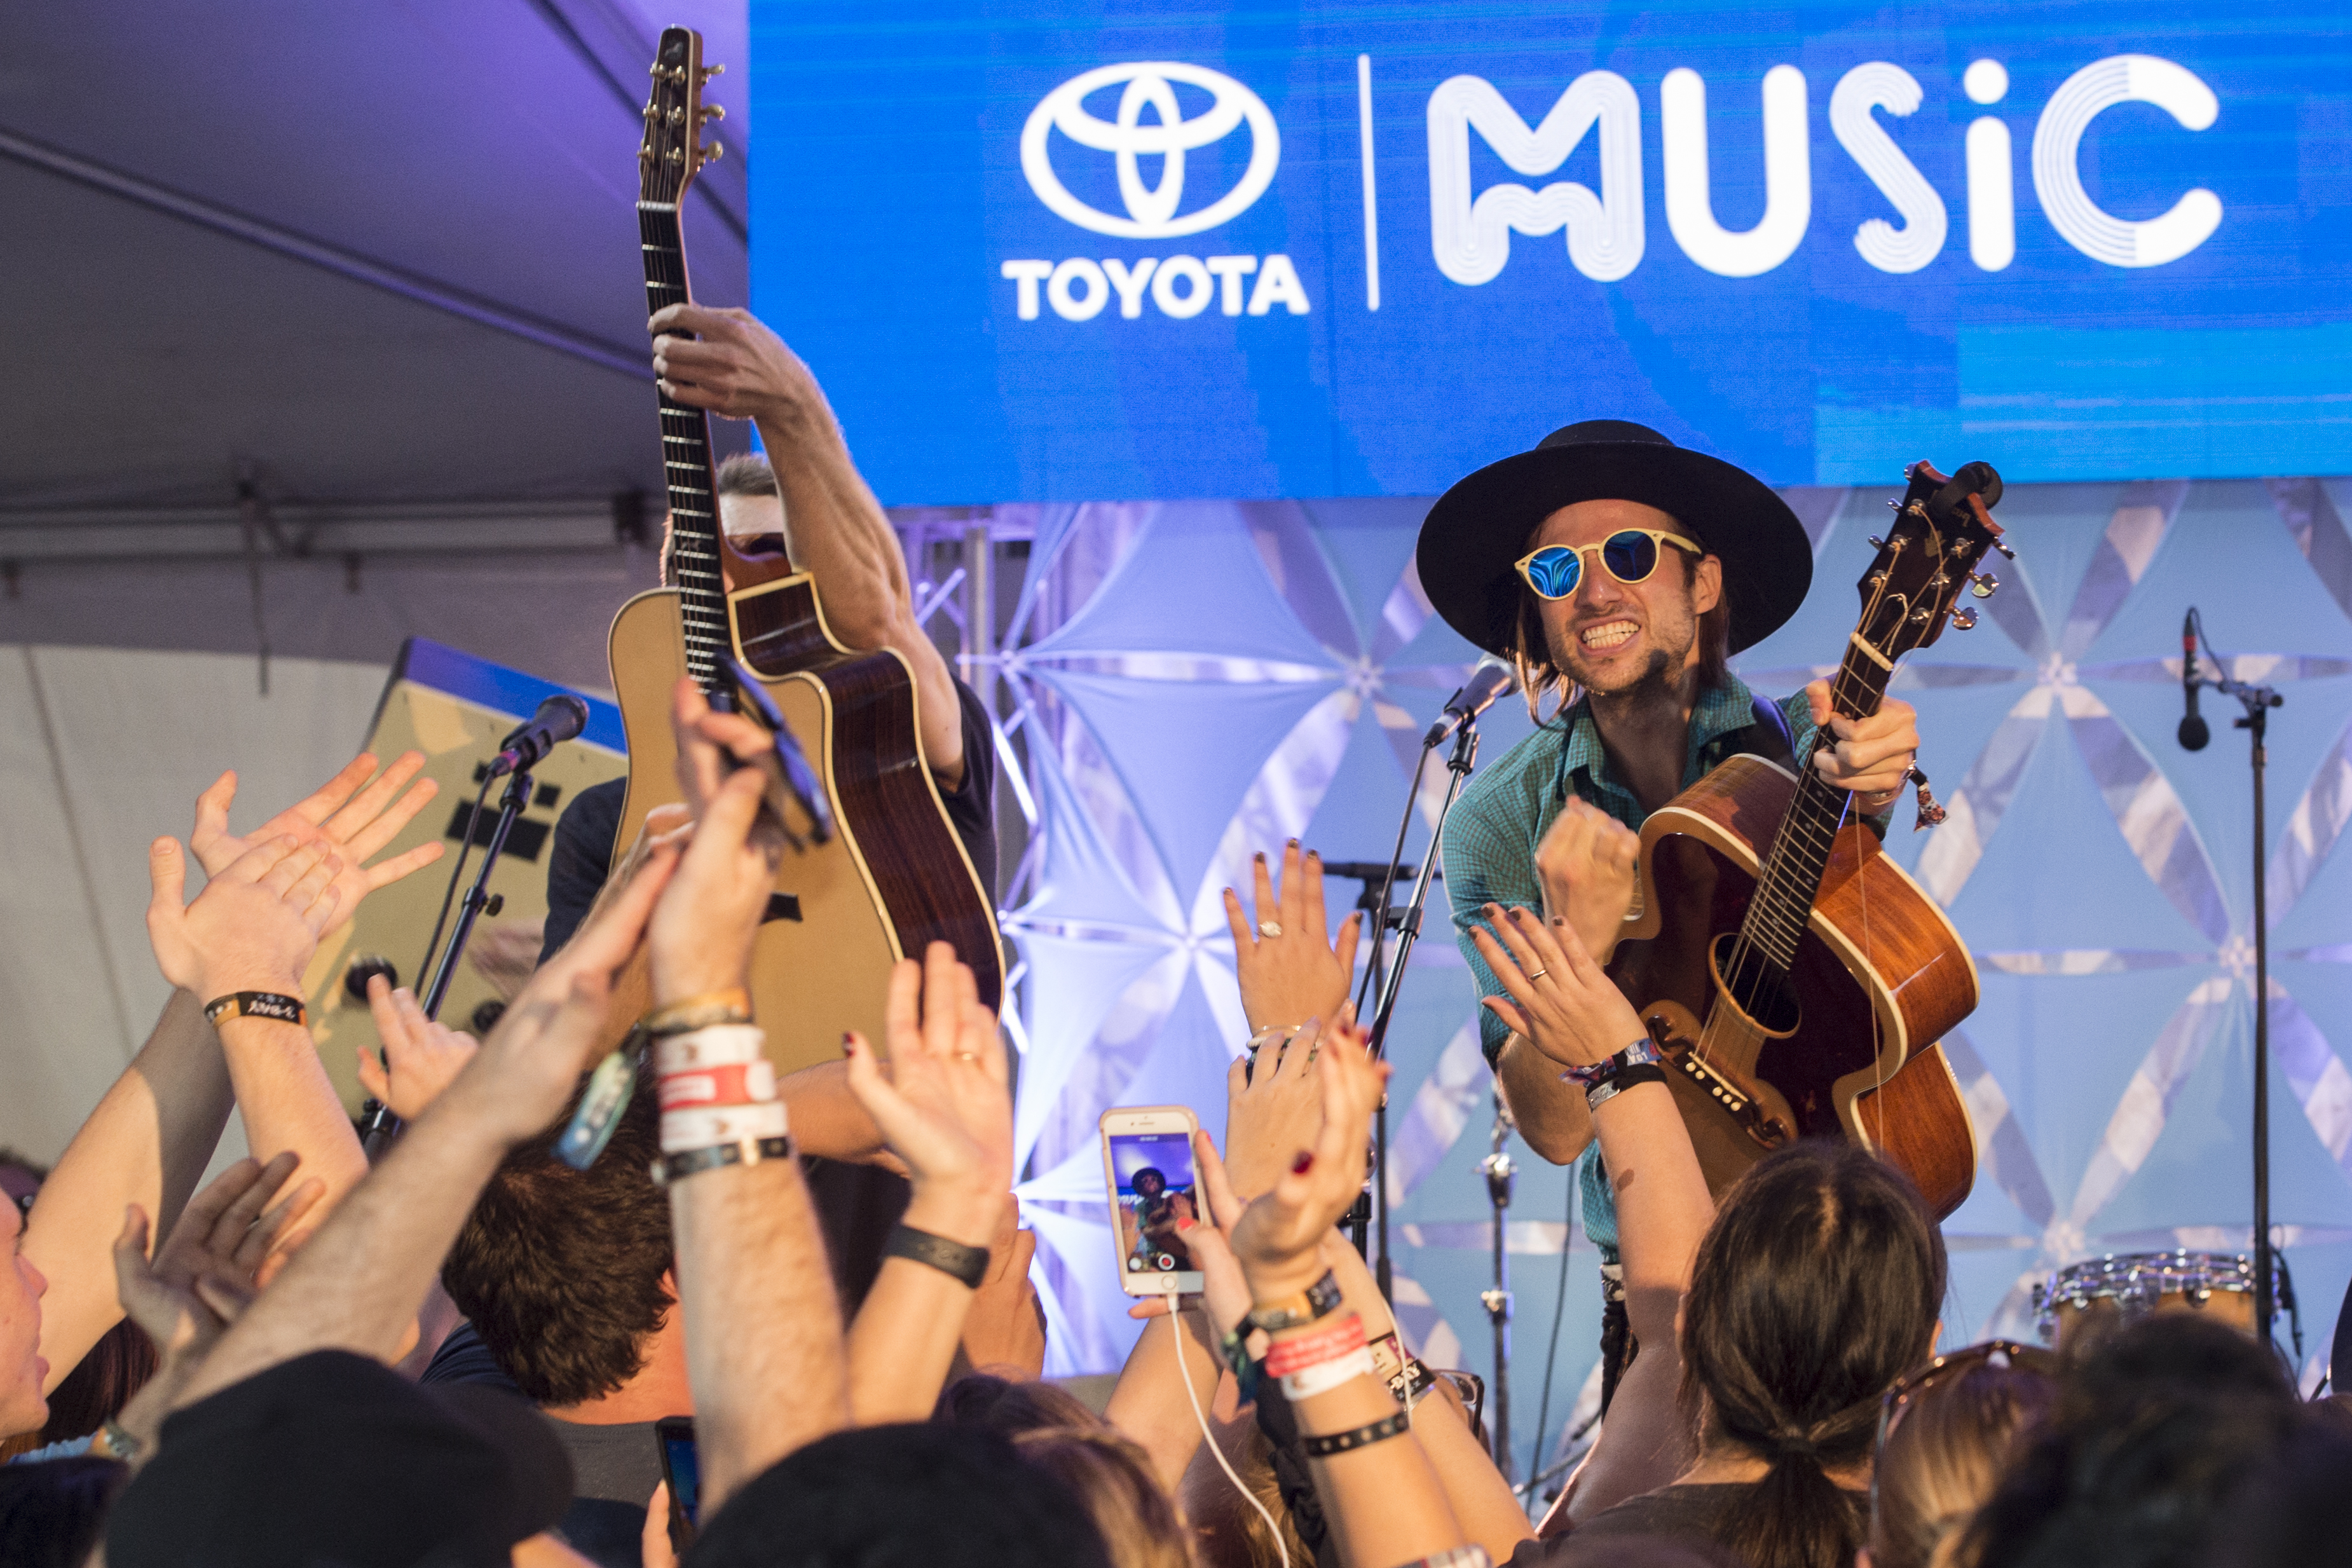 SPIN at Voodoo 2016: Day 2 at Toyota Music Den with Reignwolf, Shakey Graves and More